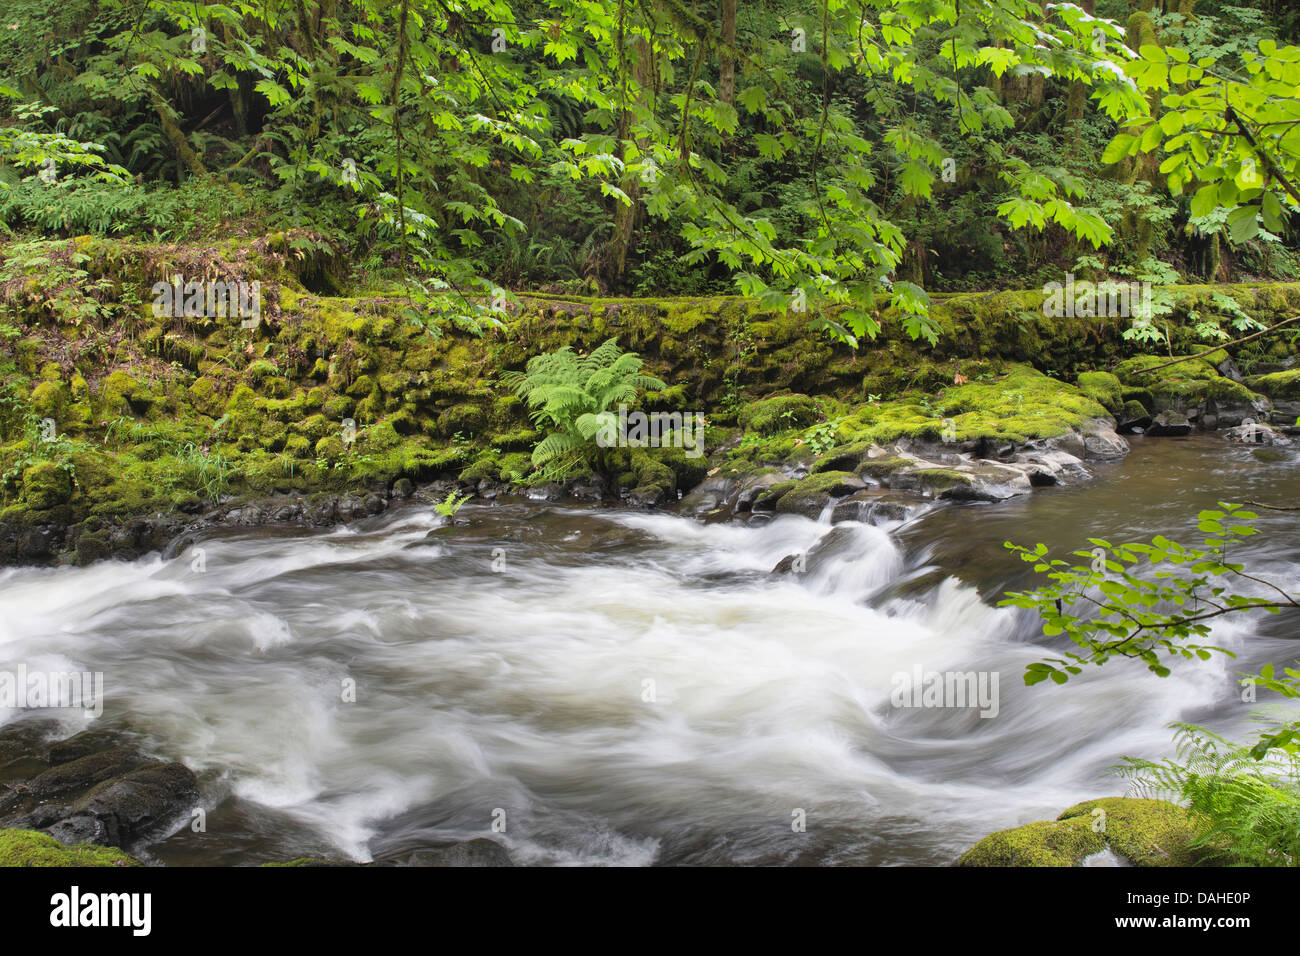 Rushing Water with Trees Moss Ferns and Rocks at Cedar Creek Washington State Stock Photo